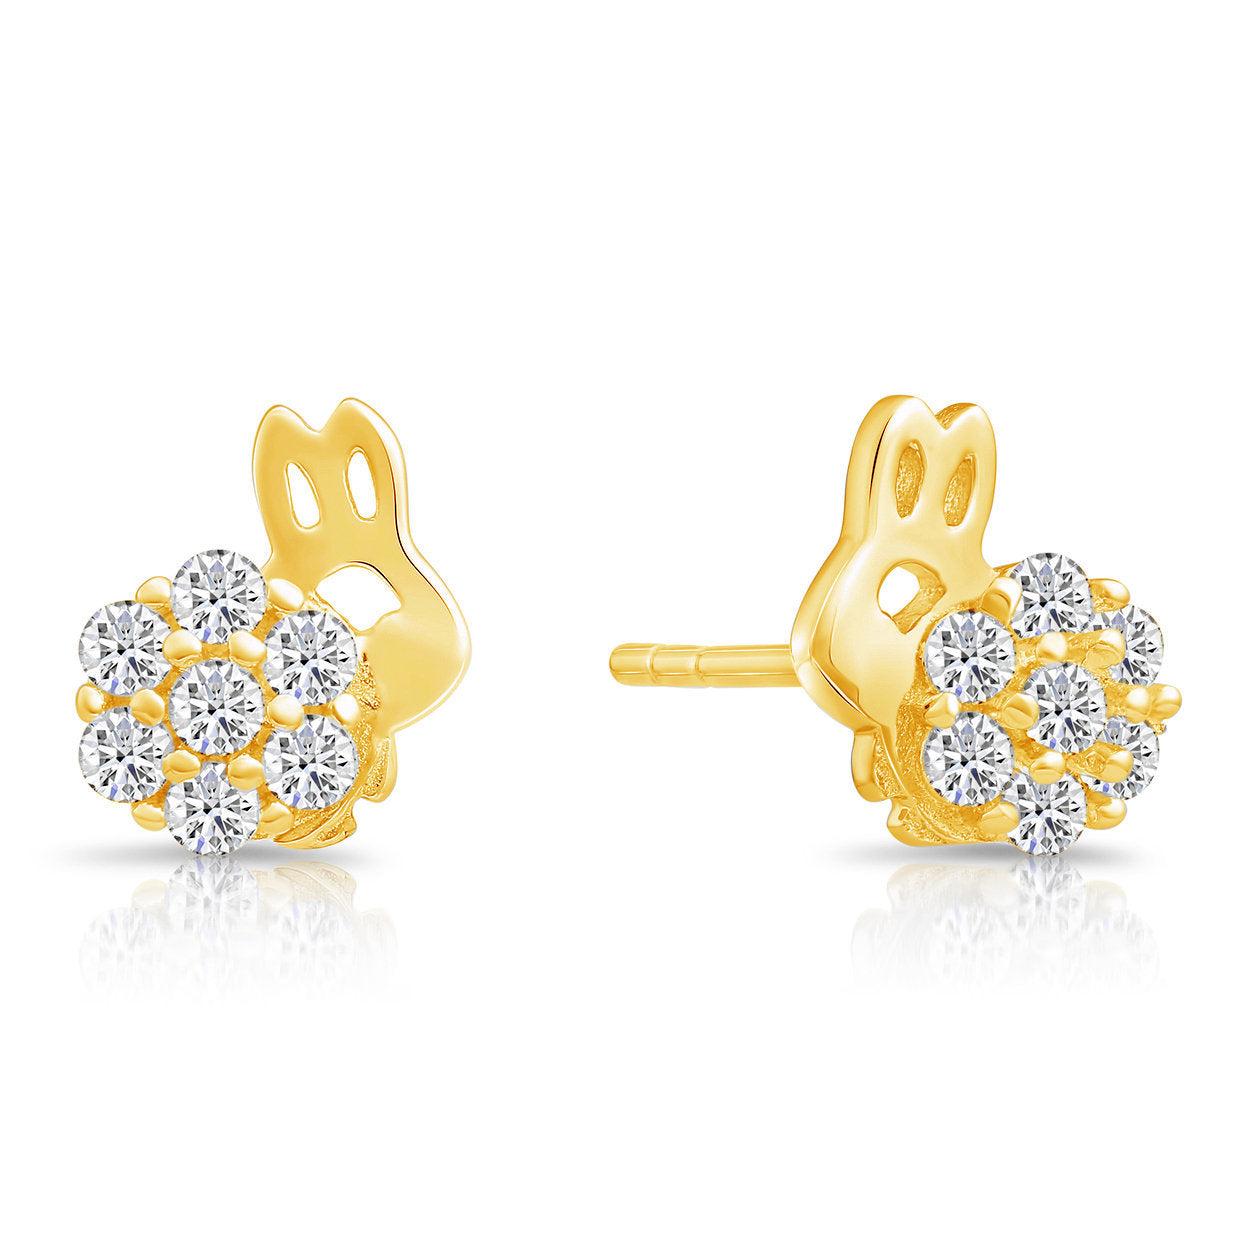 Sterling Silver Bunny Stud Earrings, Gold Plated